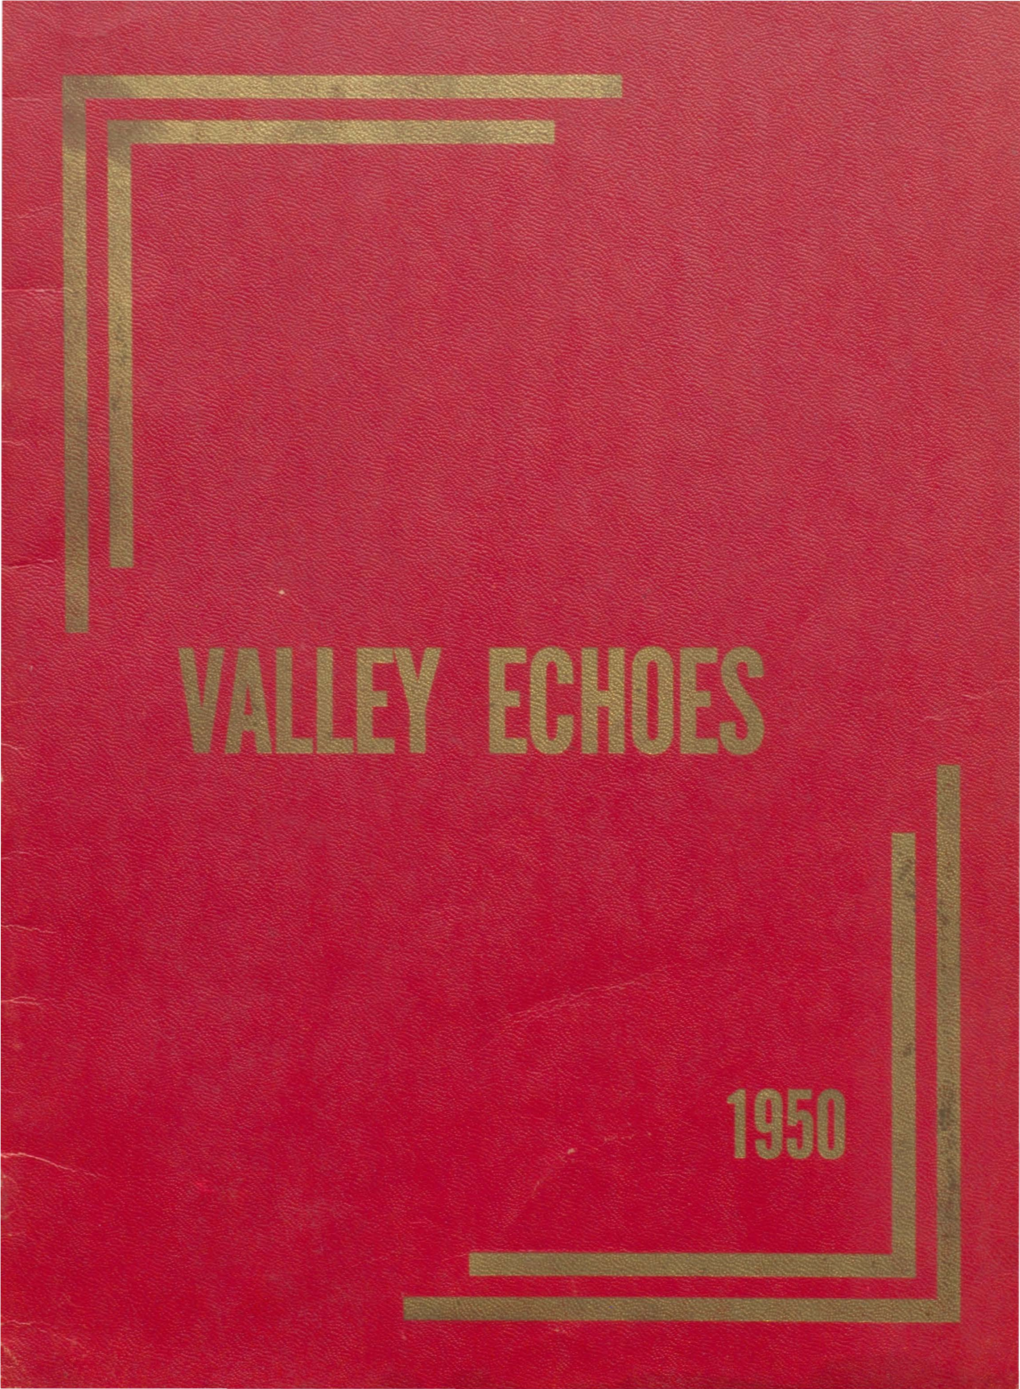 1950 Valley Echoes